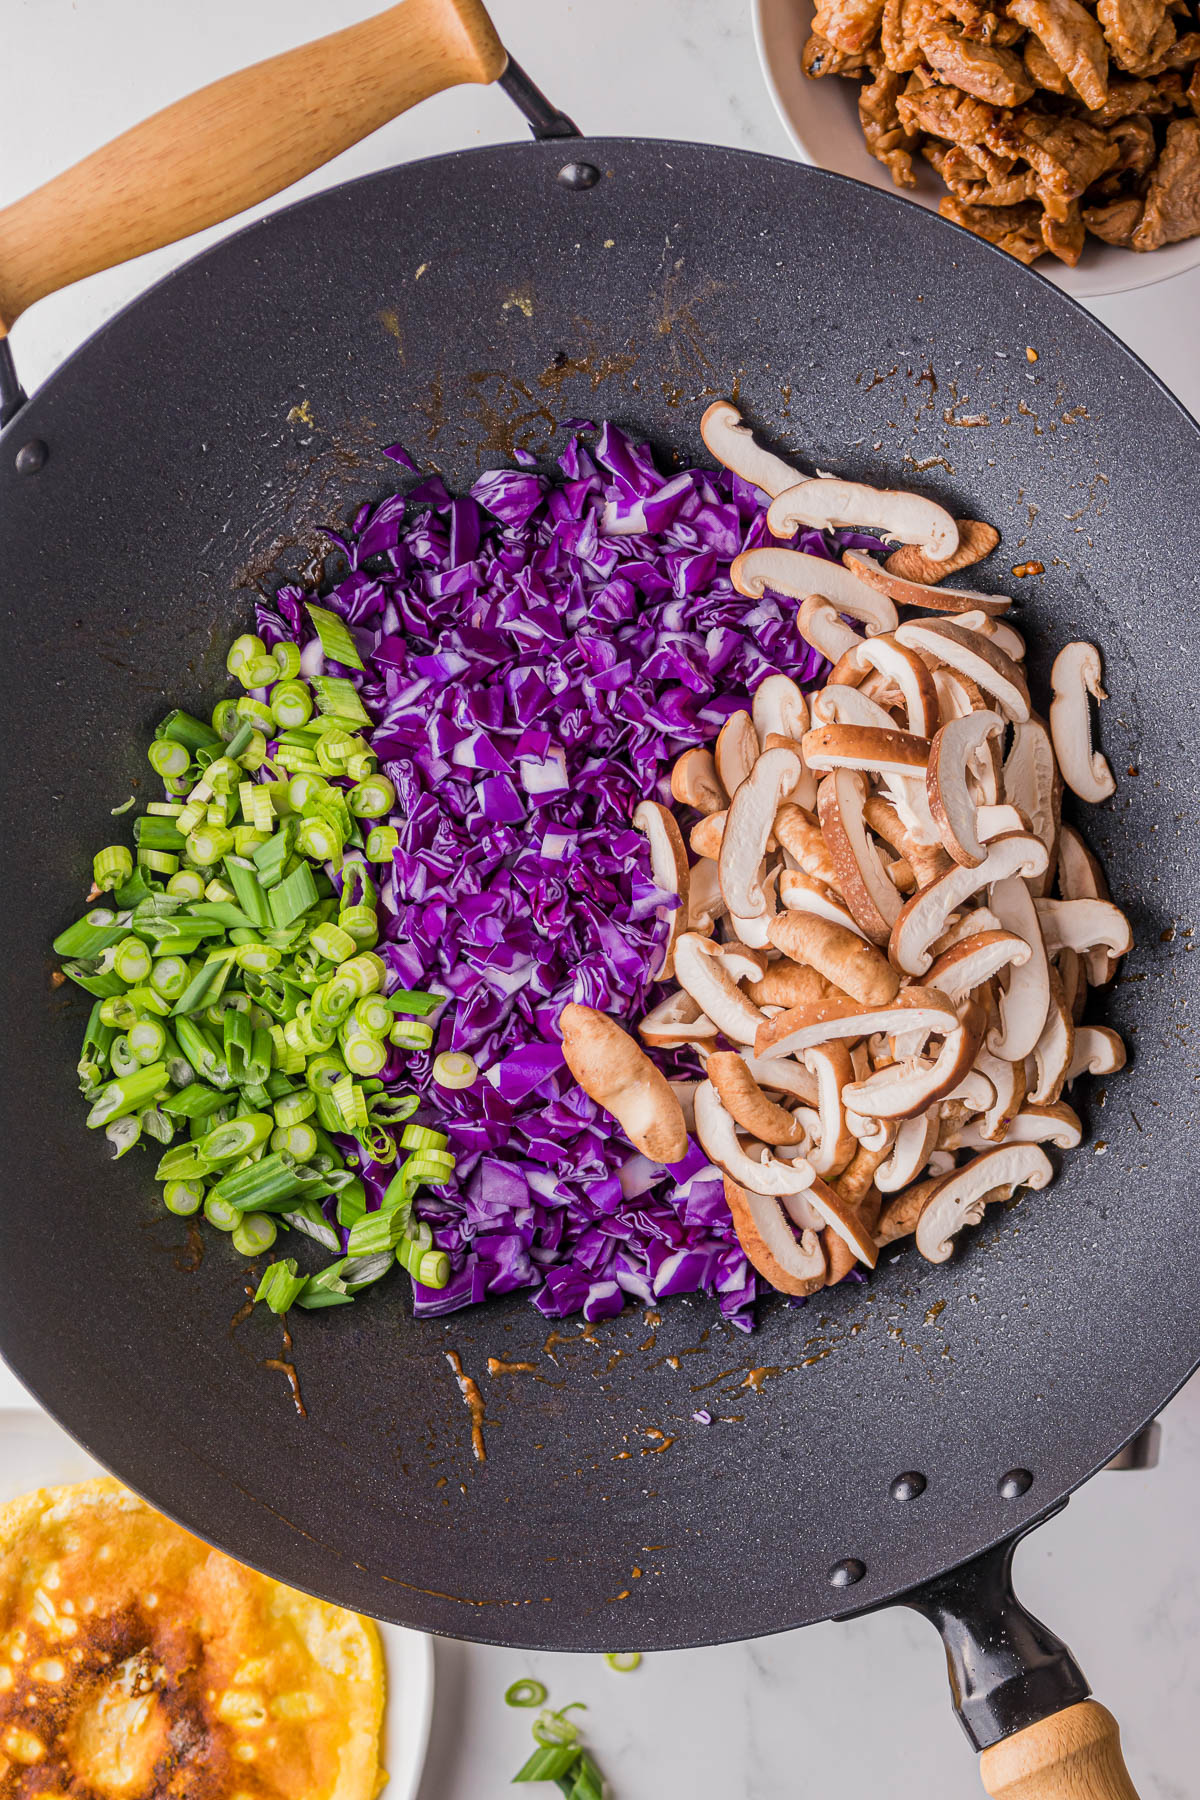 cooking chopped green onions, purple cabbage, and mushrooms in a wok pan.